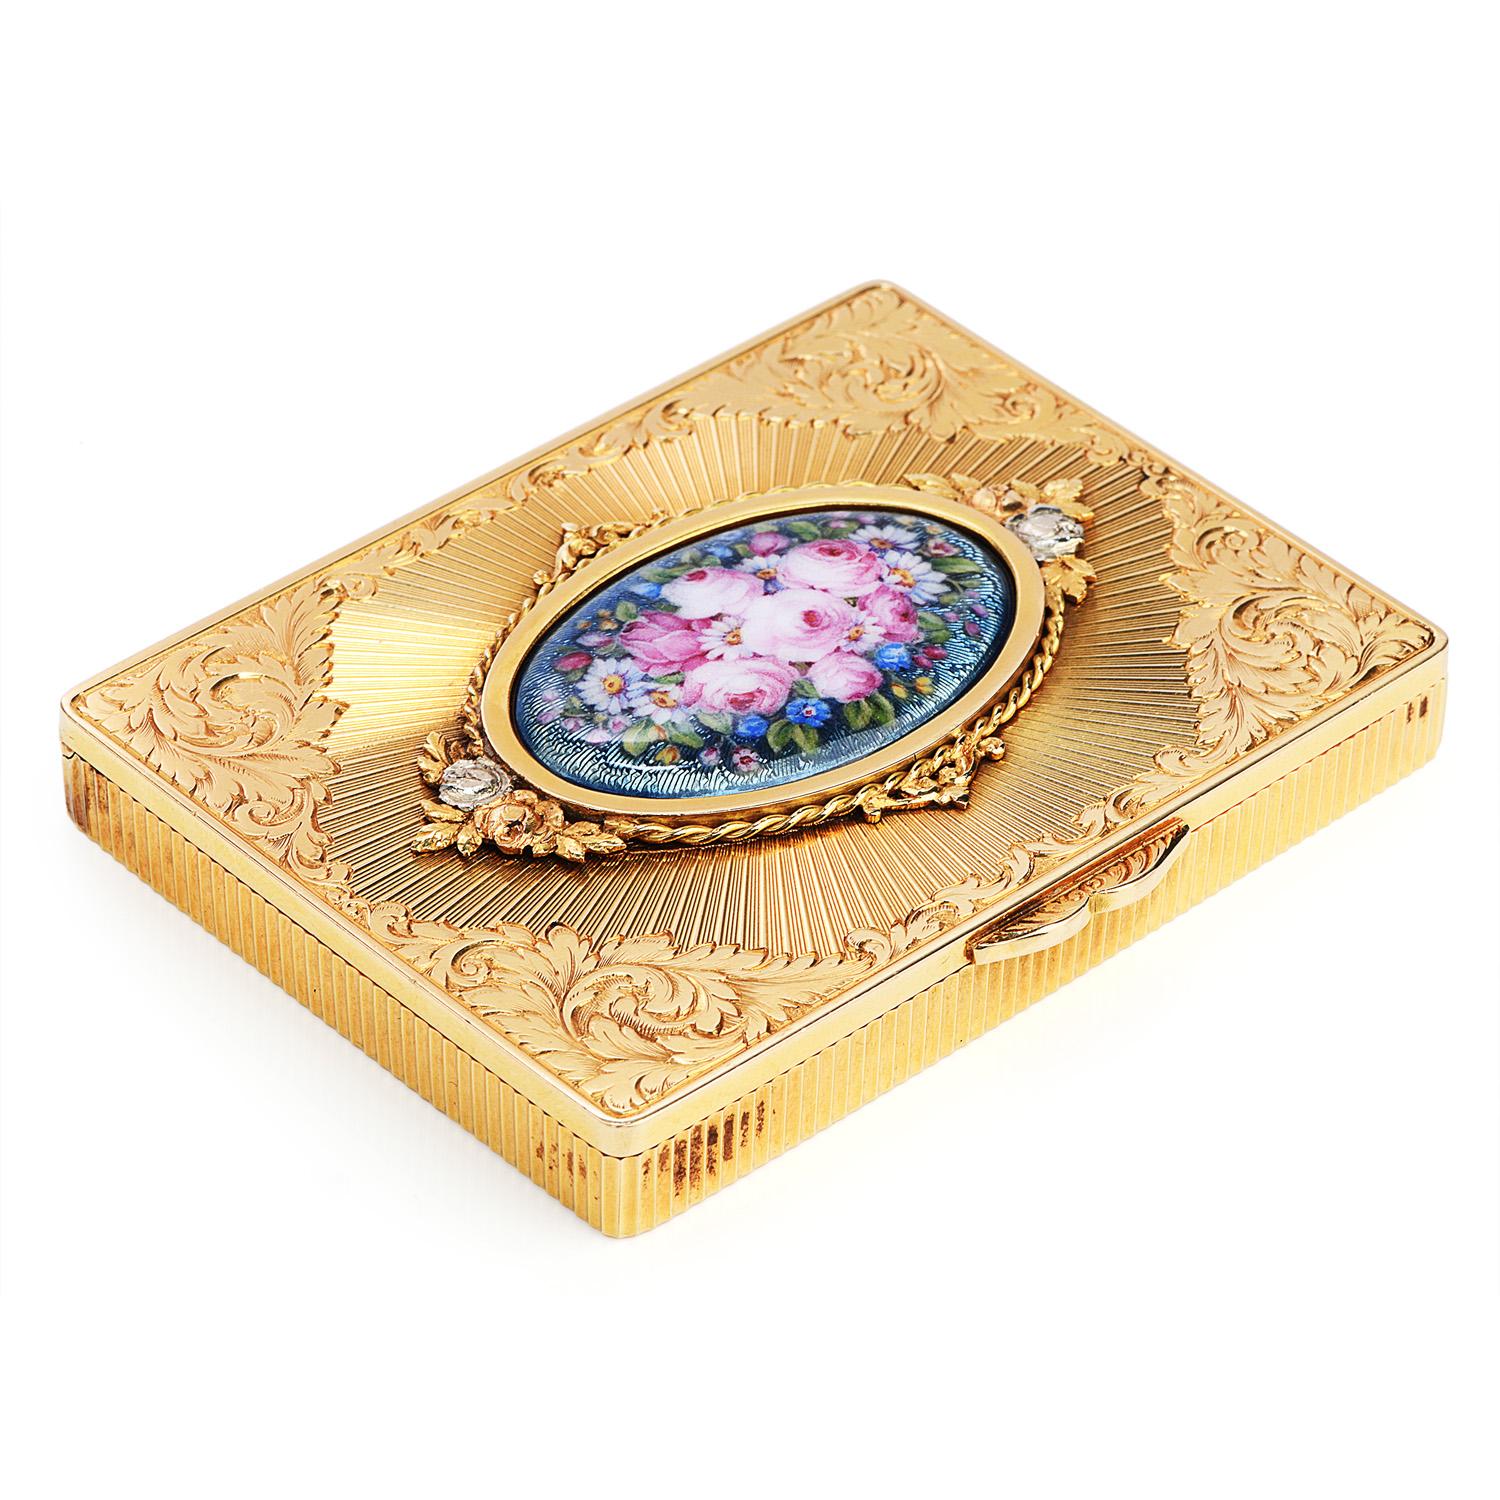 This European vintage 1940's Hand engraved gold box is crafted in solid 18-karat yellow gold it can be used to store your business cards, pills or tobacco, weighing 170.0 grams of 18k solid gold and measuring 3.1 inches x 2.5 inches x 10mm. It